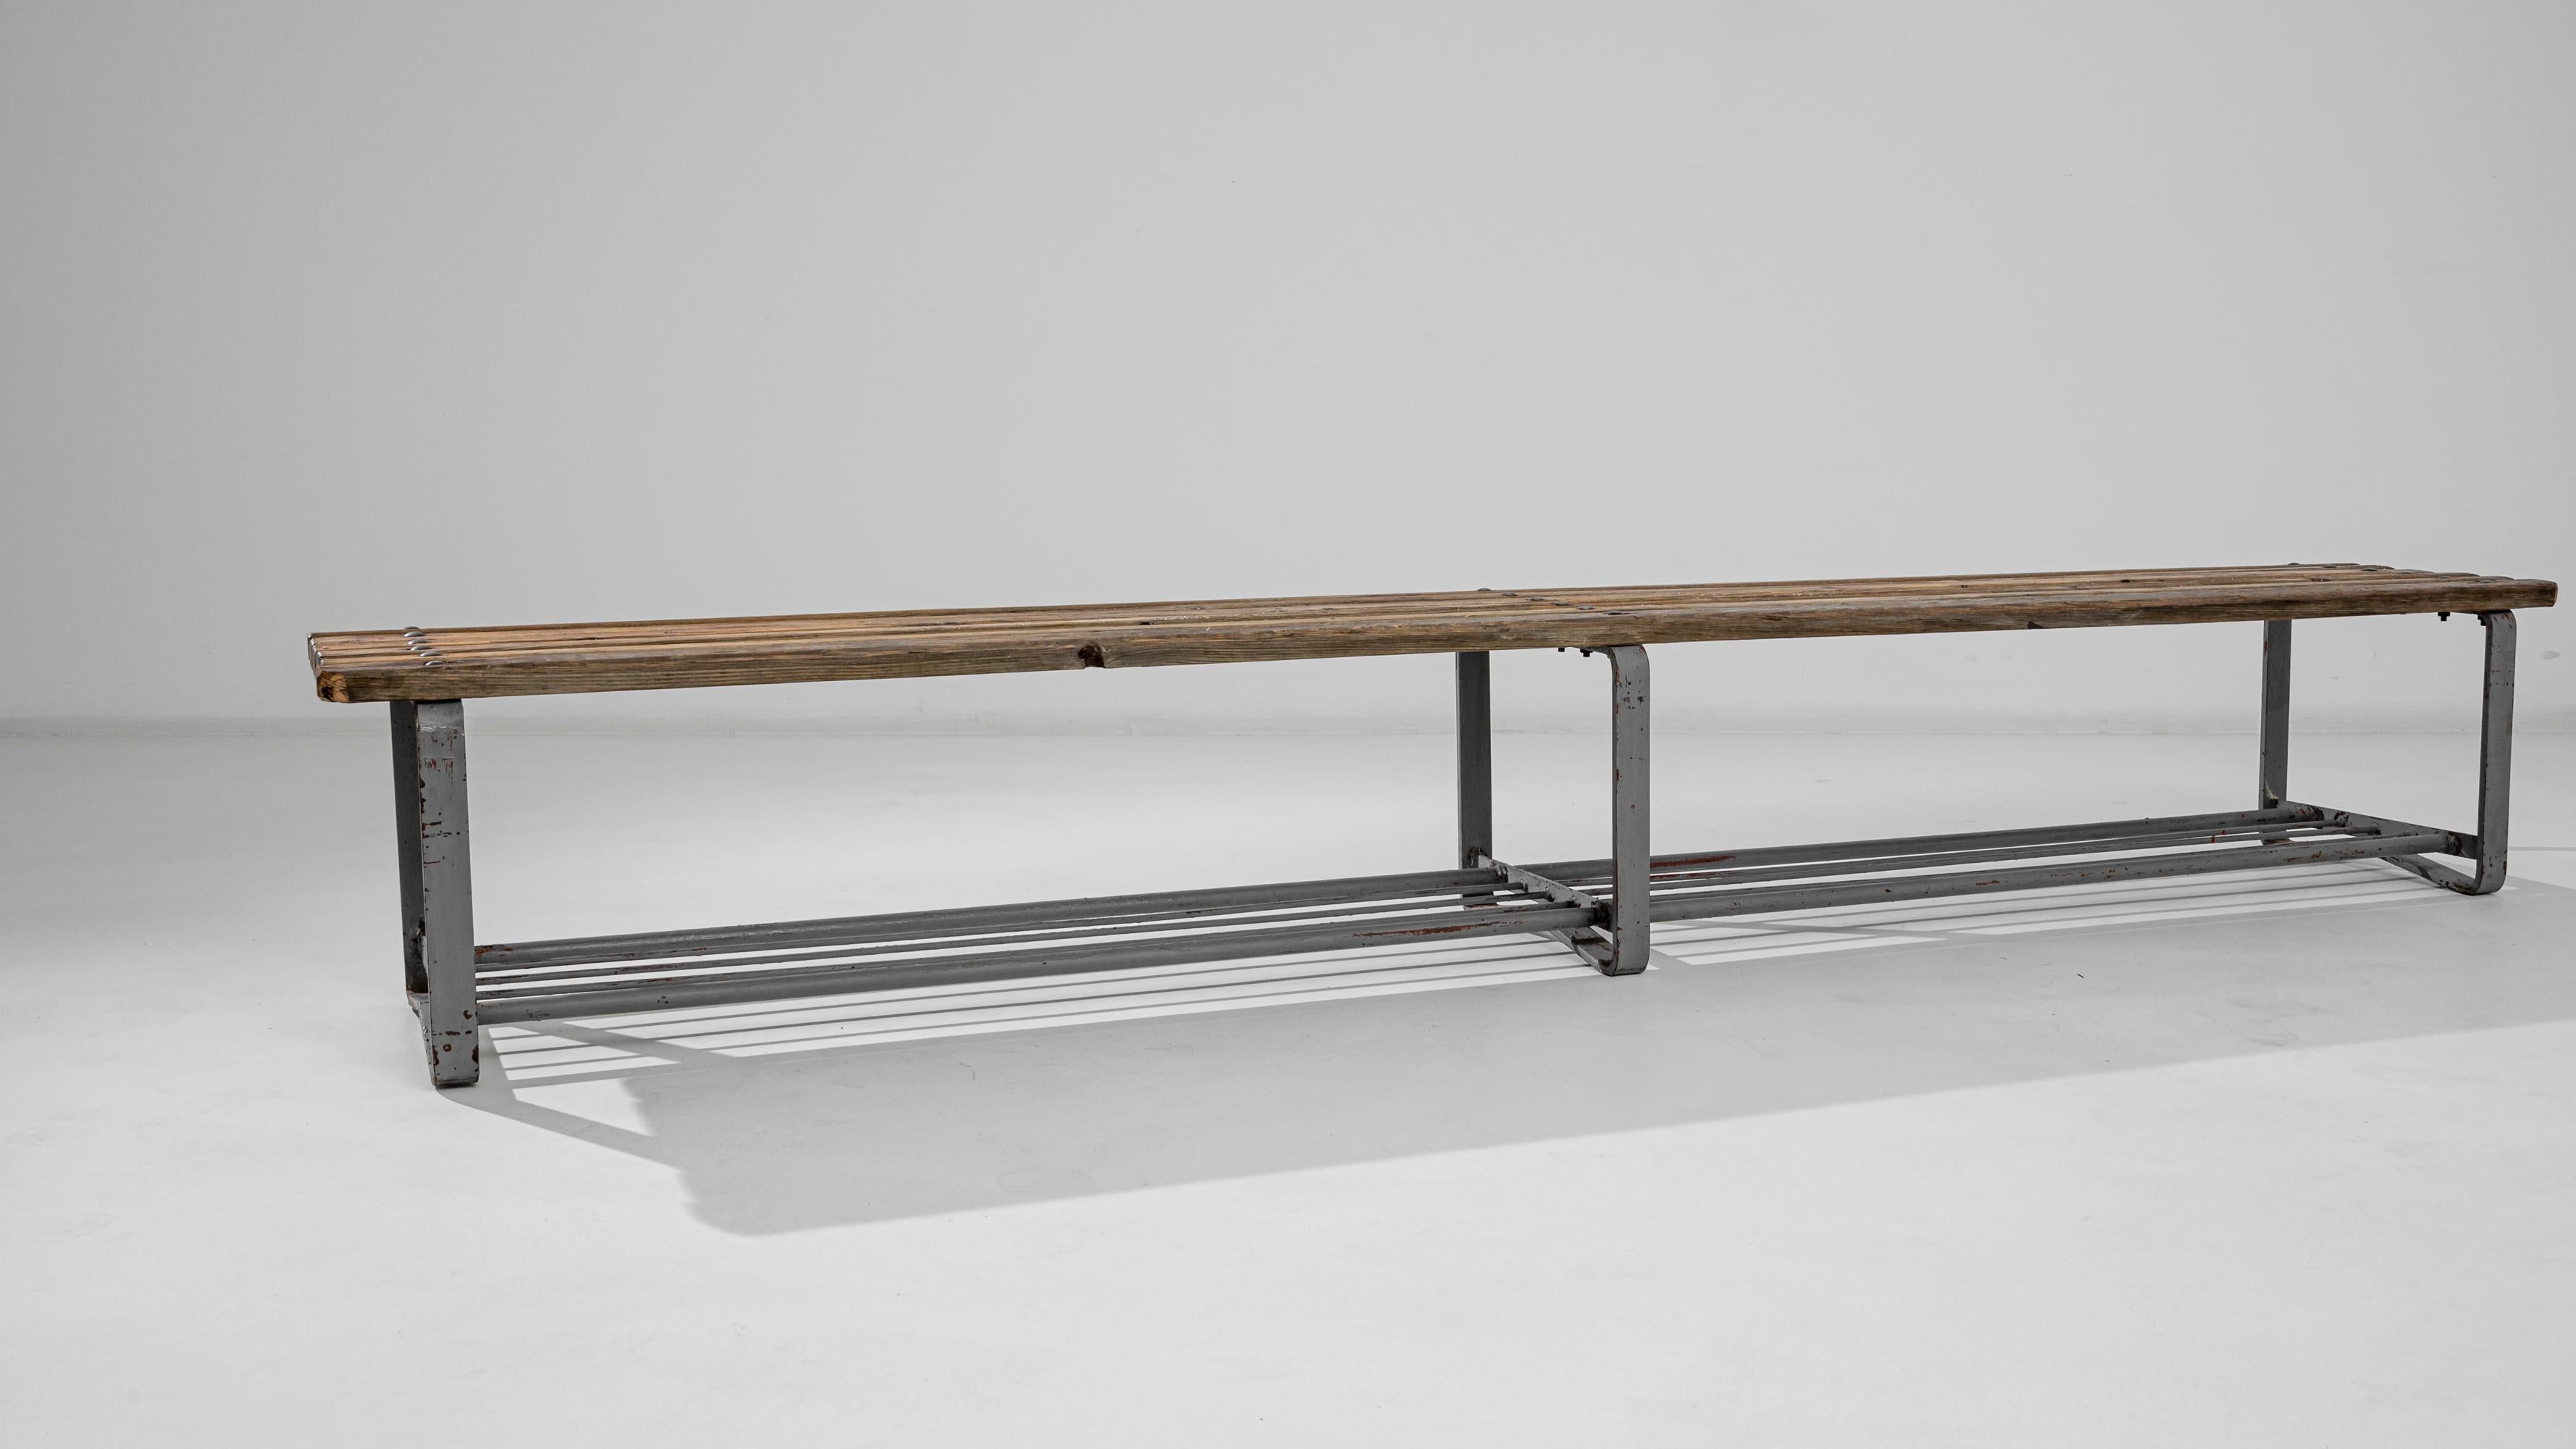 Czech Vintage Industrial Bench from Central Europe